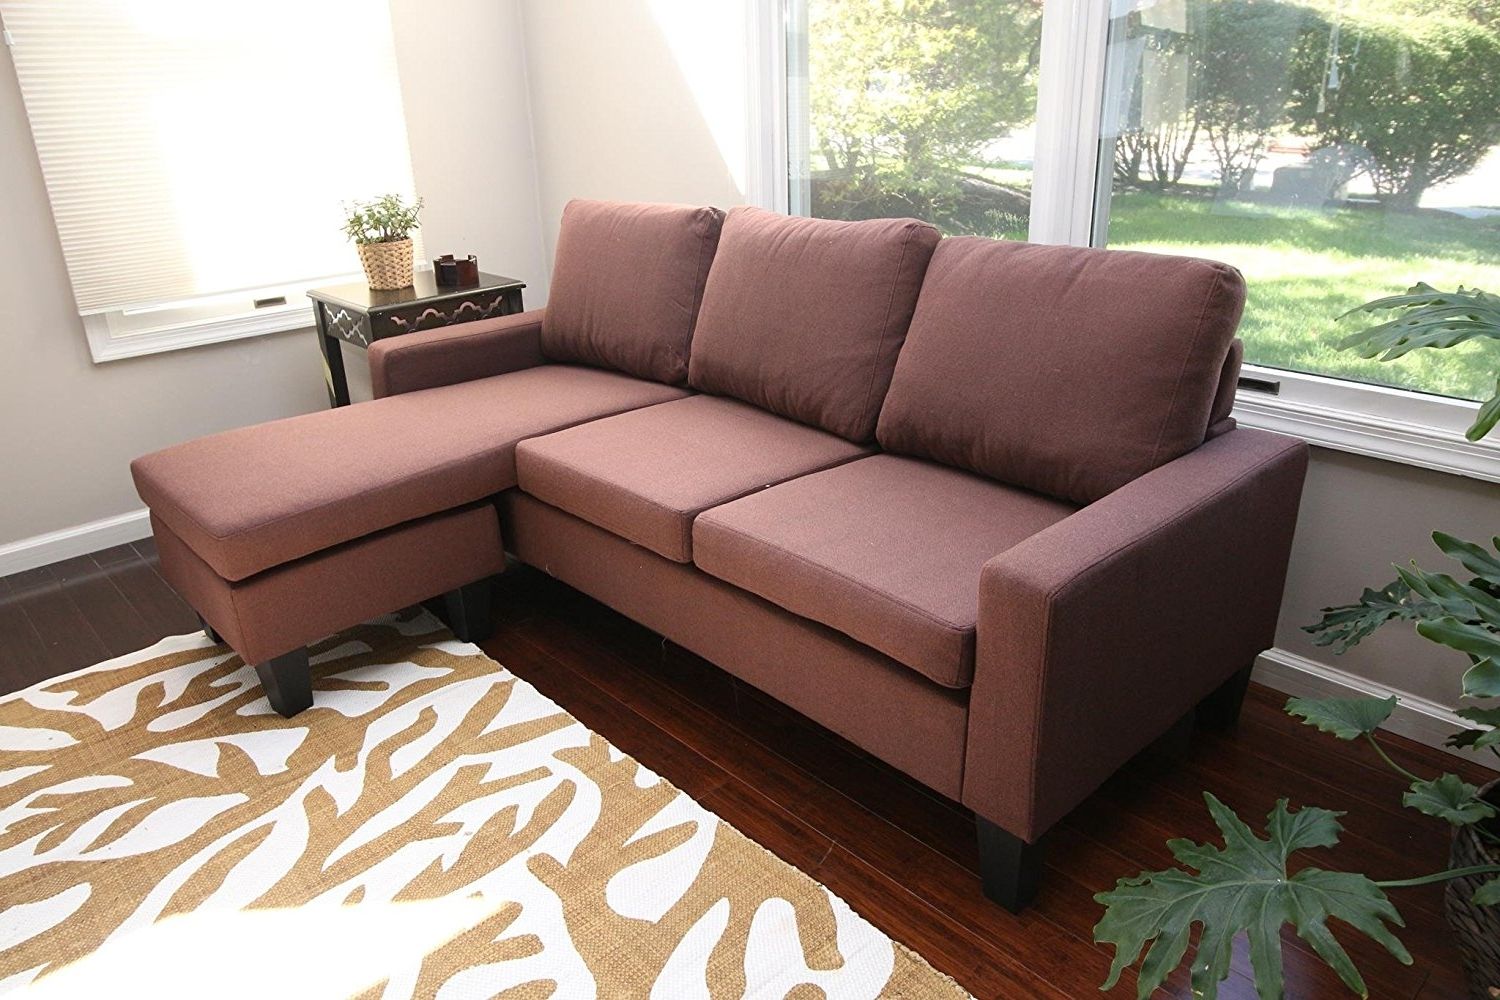 Image Gallery Of 110X110 Sectional Sofas View 1 Of 20 Photos